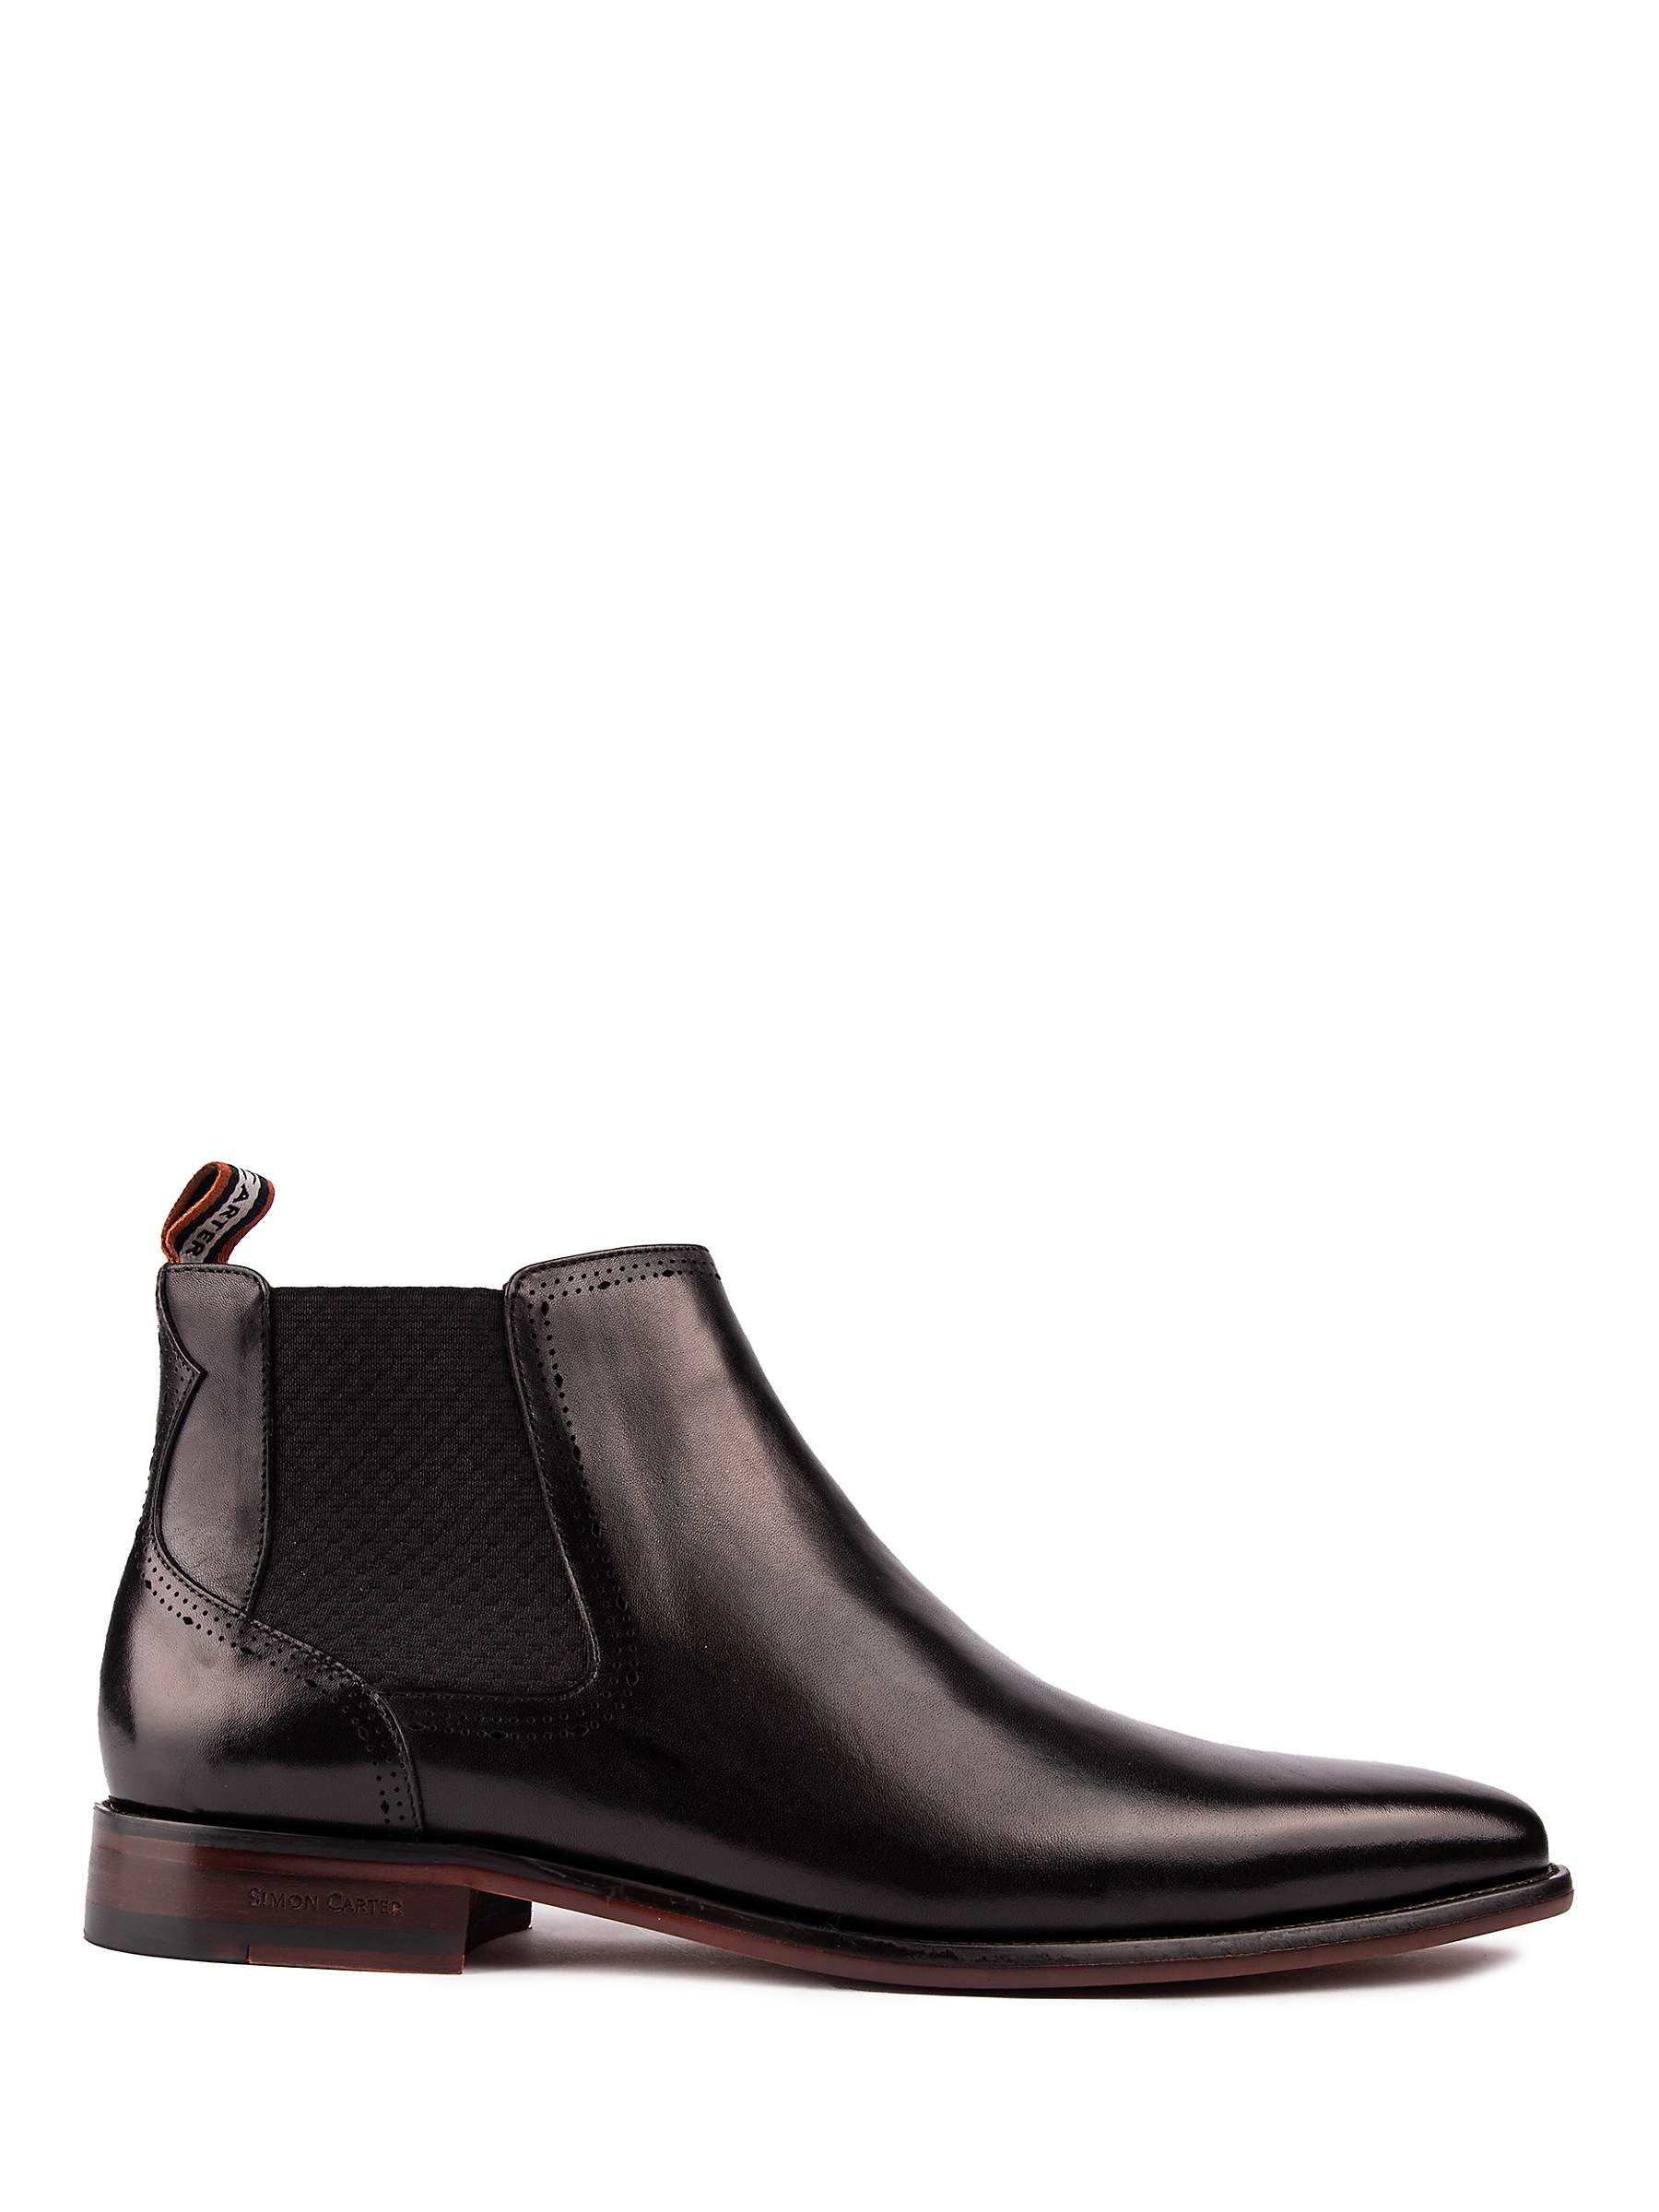 Buy Simon Carter Astrex Leather Chelsea Boots Online at johnlewis.com